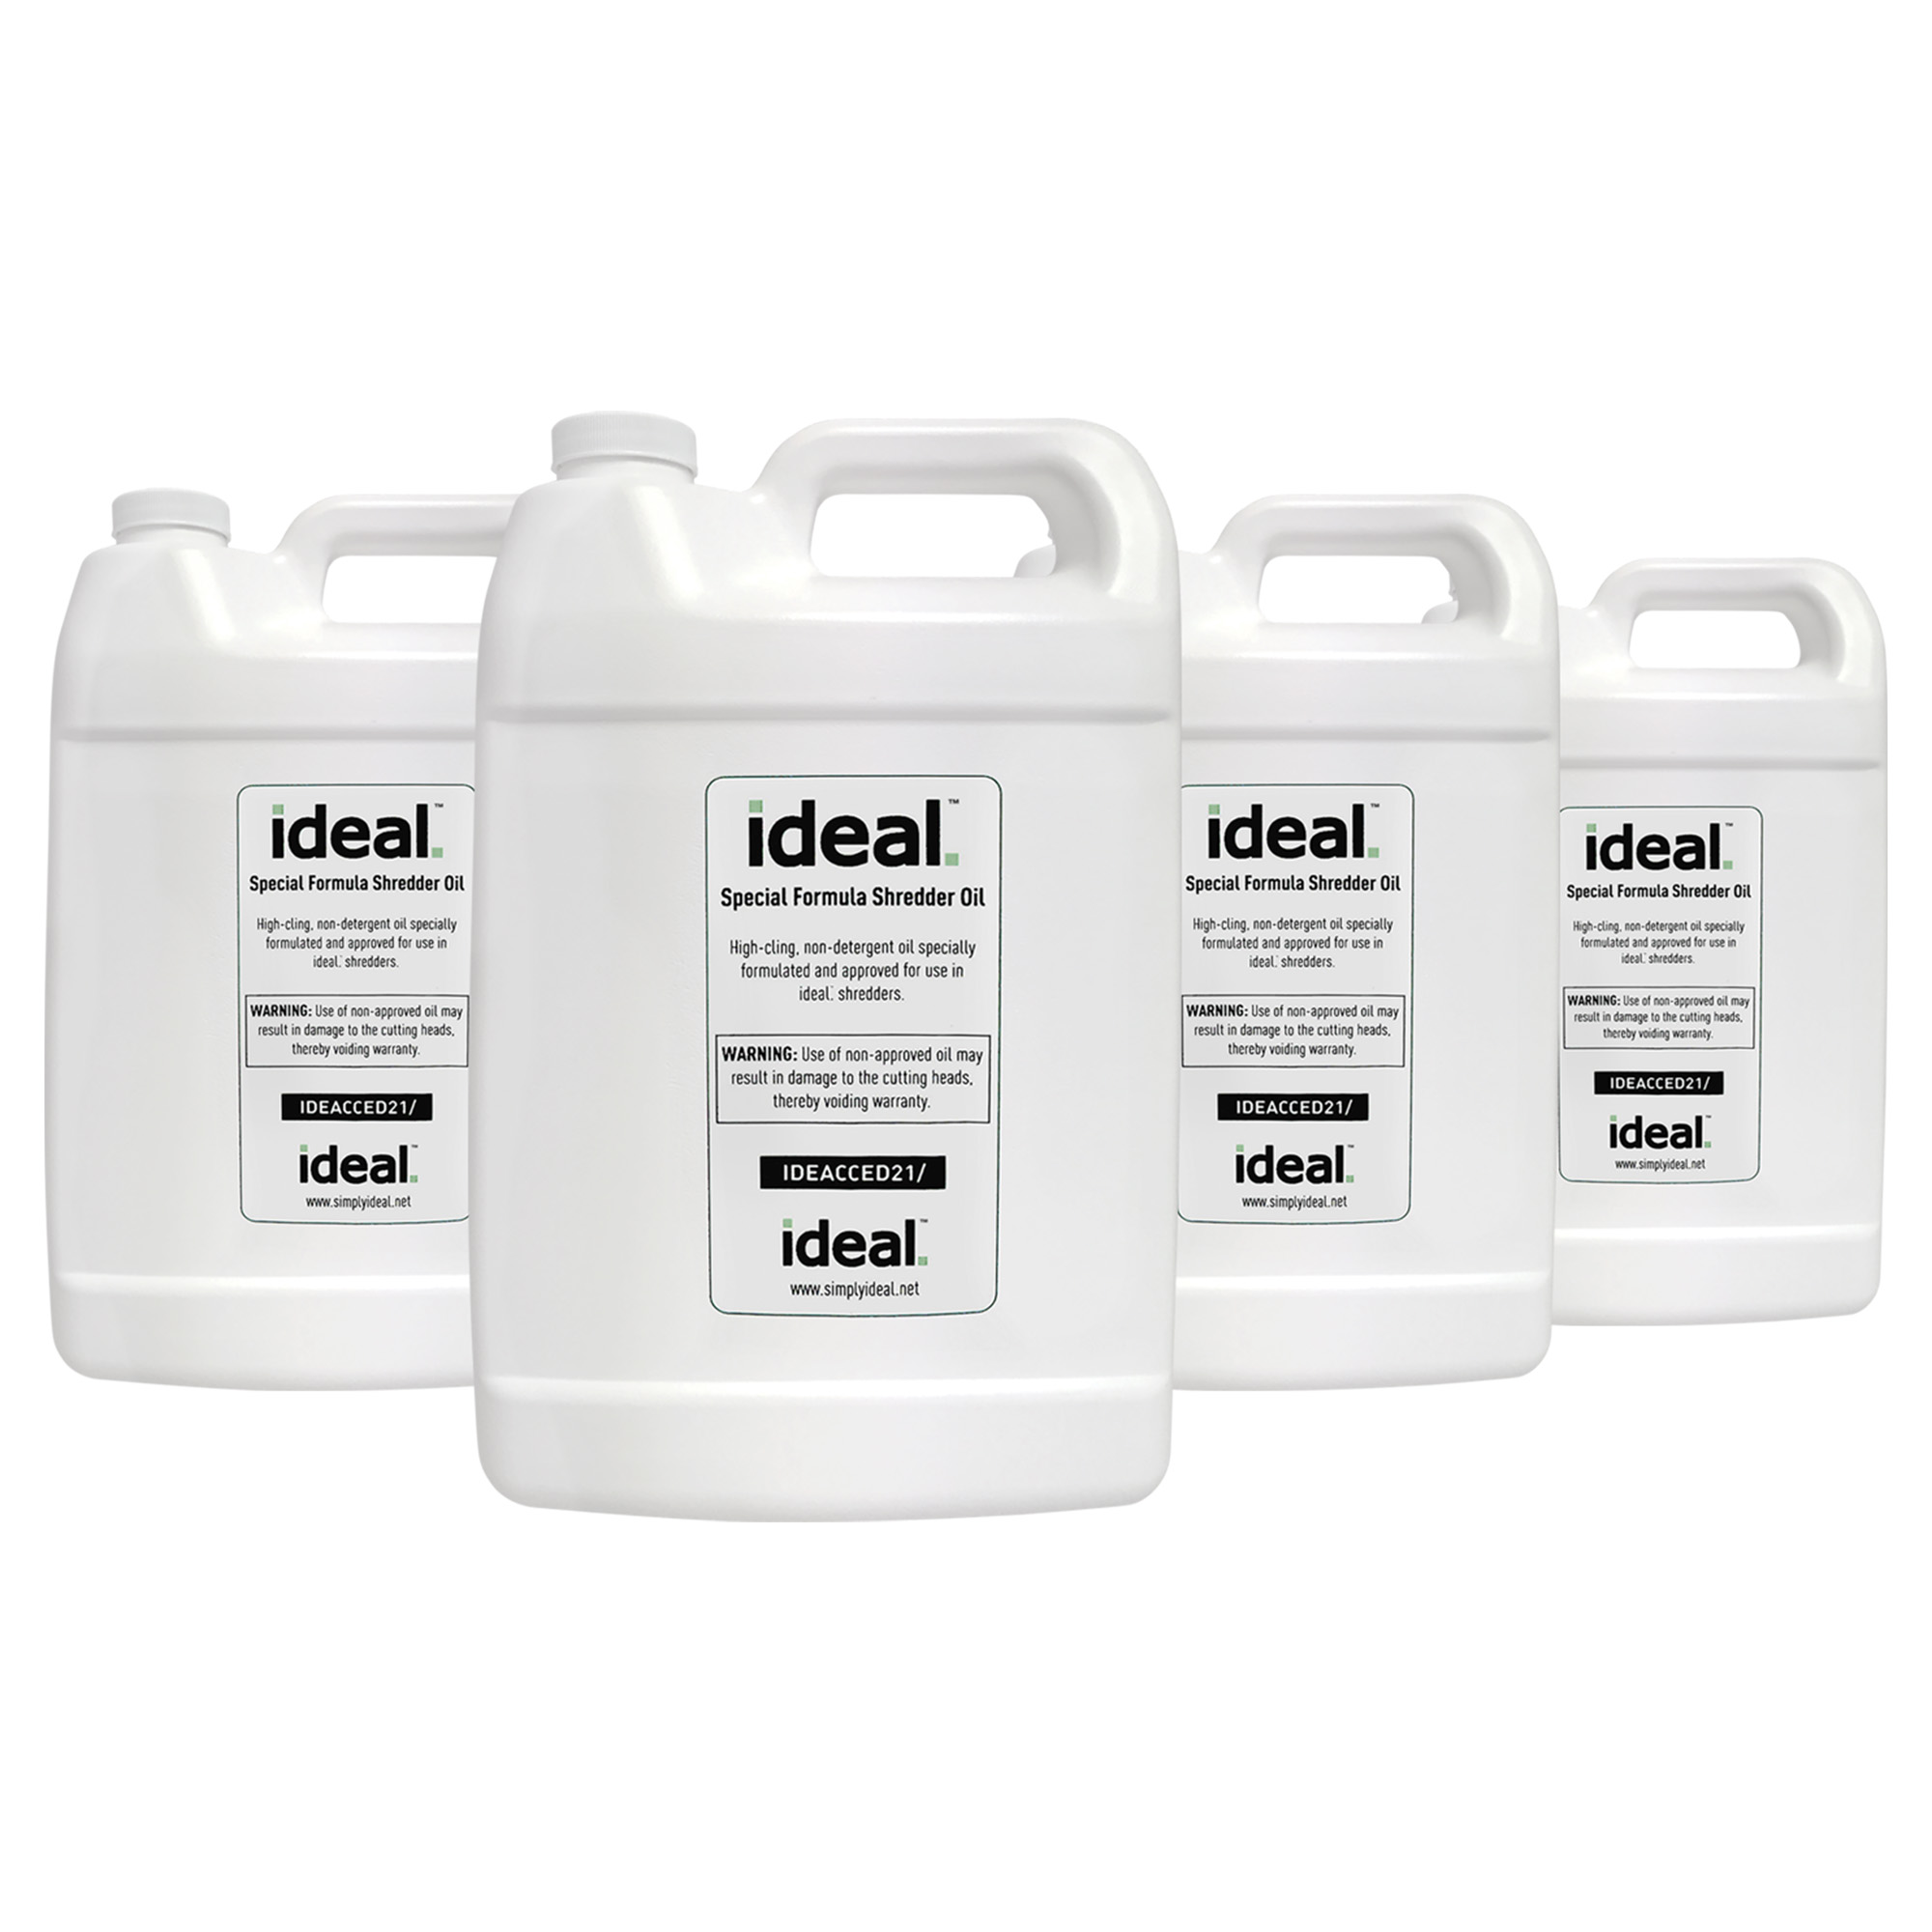 Ideal IDEACCED21-GH 1 gal Special High-Cling Lubricating Oil for Shredders - 4 Bottles